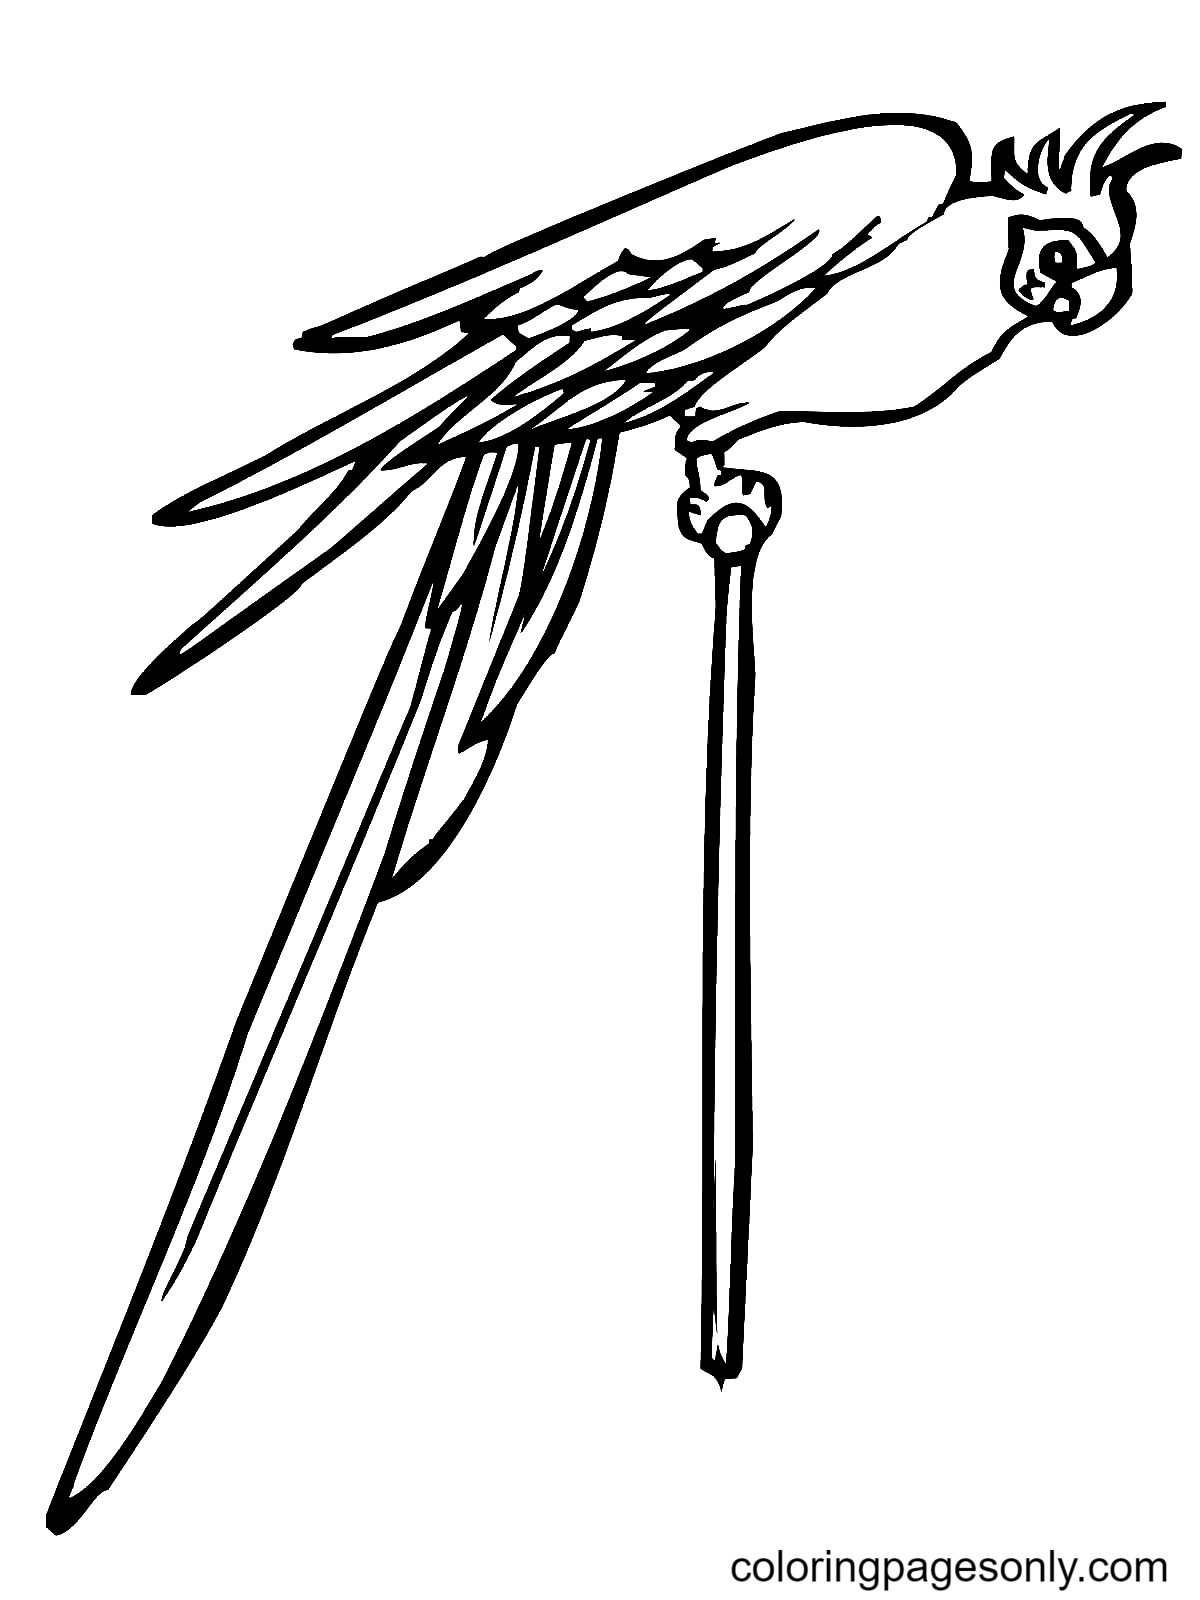 Parakeet on a Pole Coloring Page